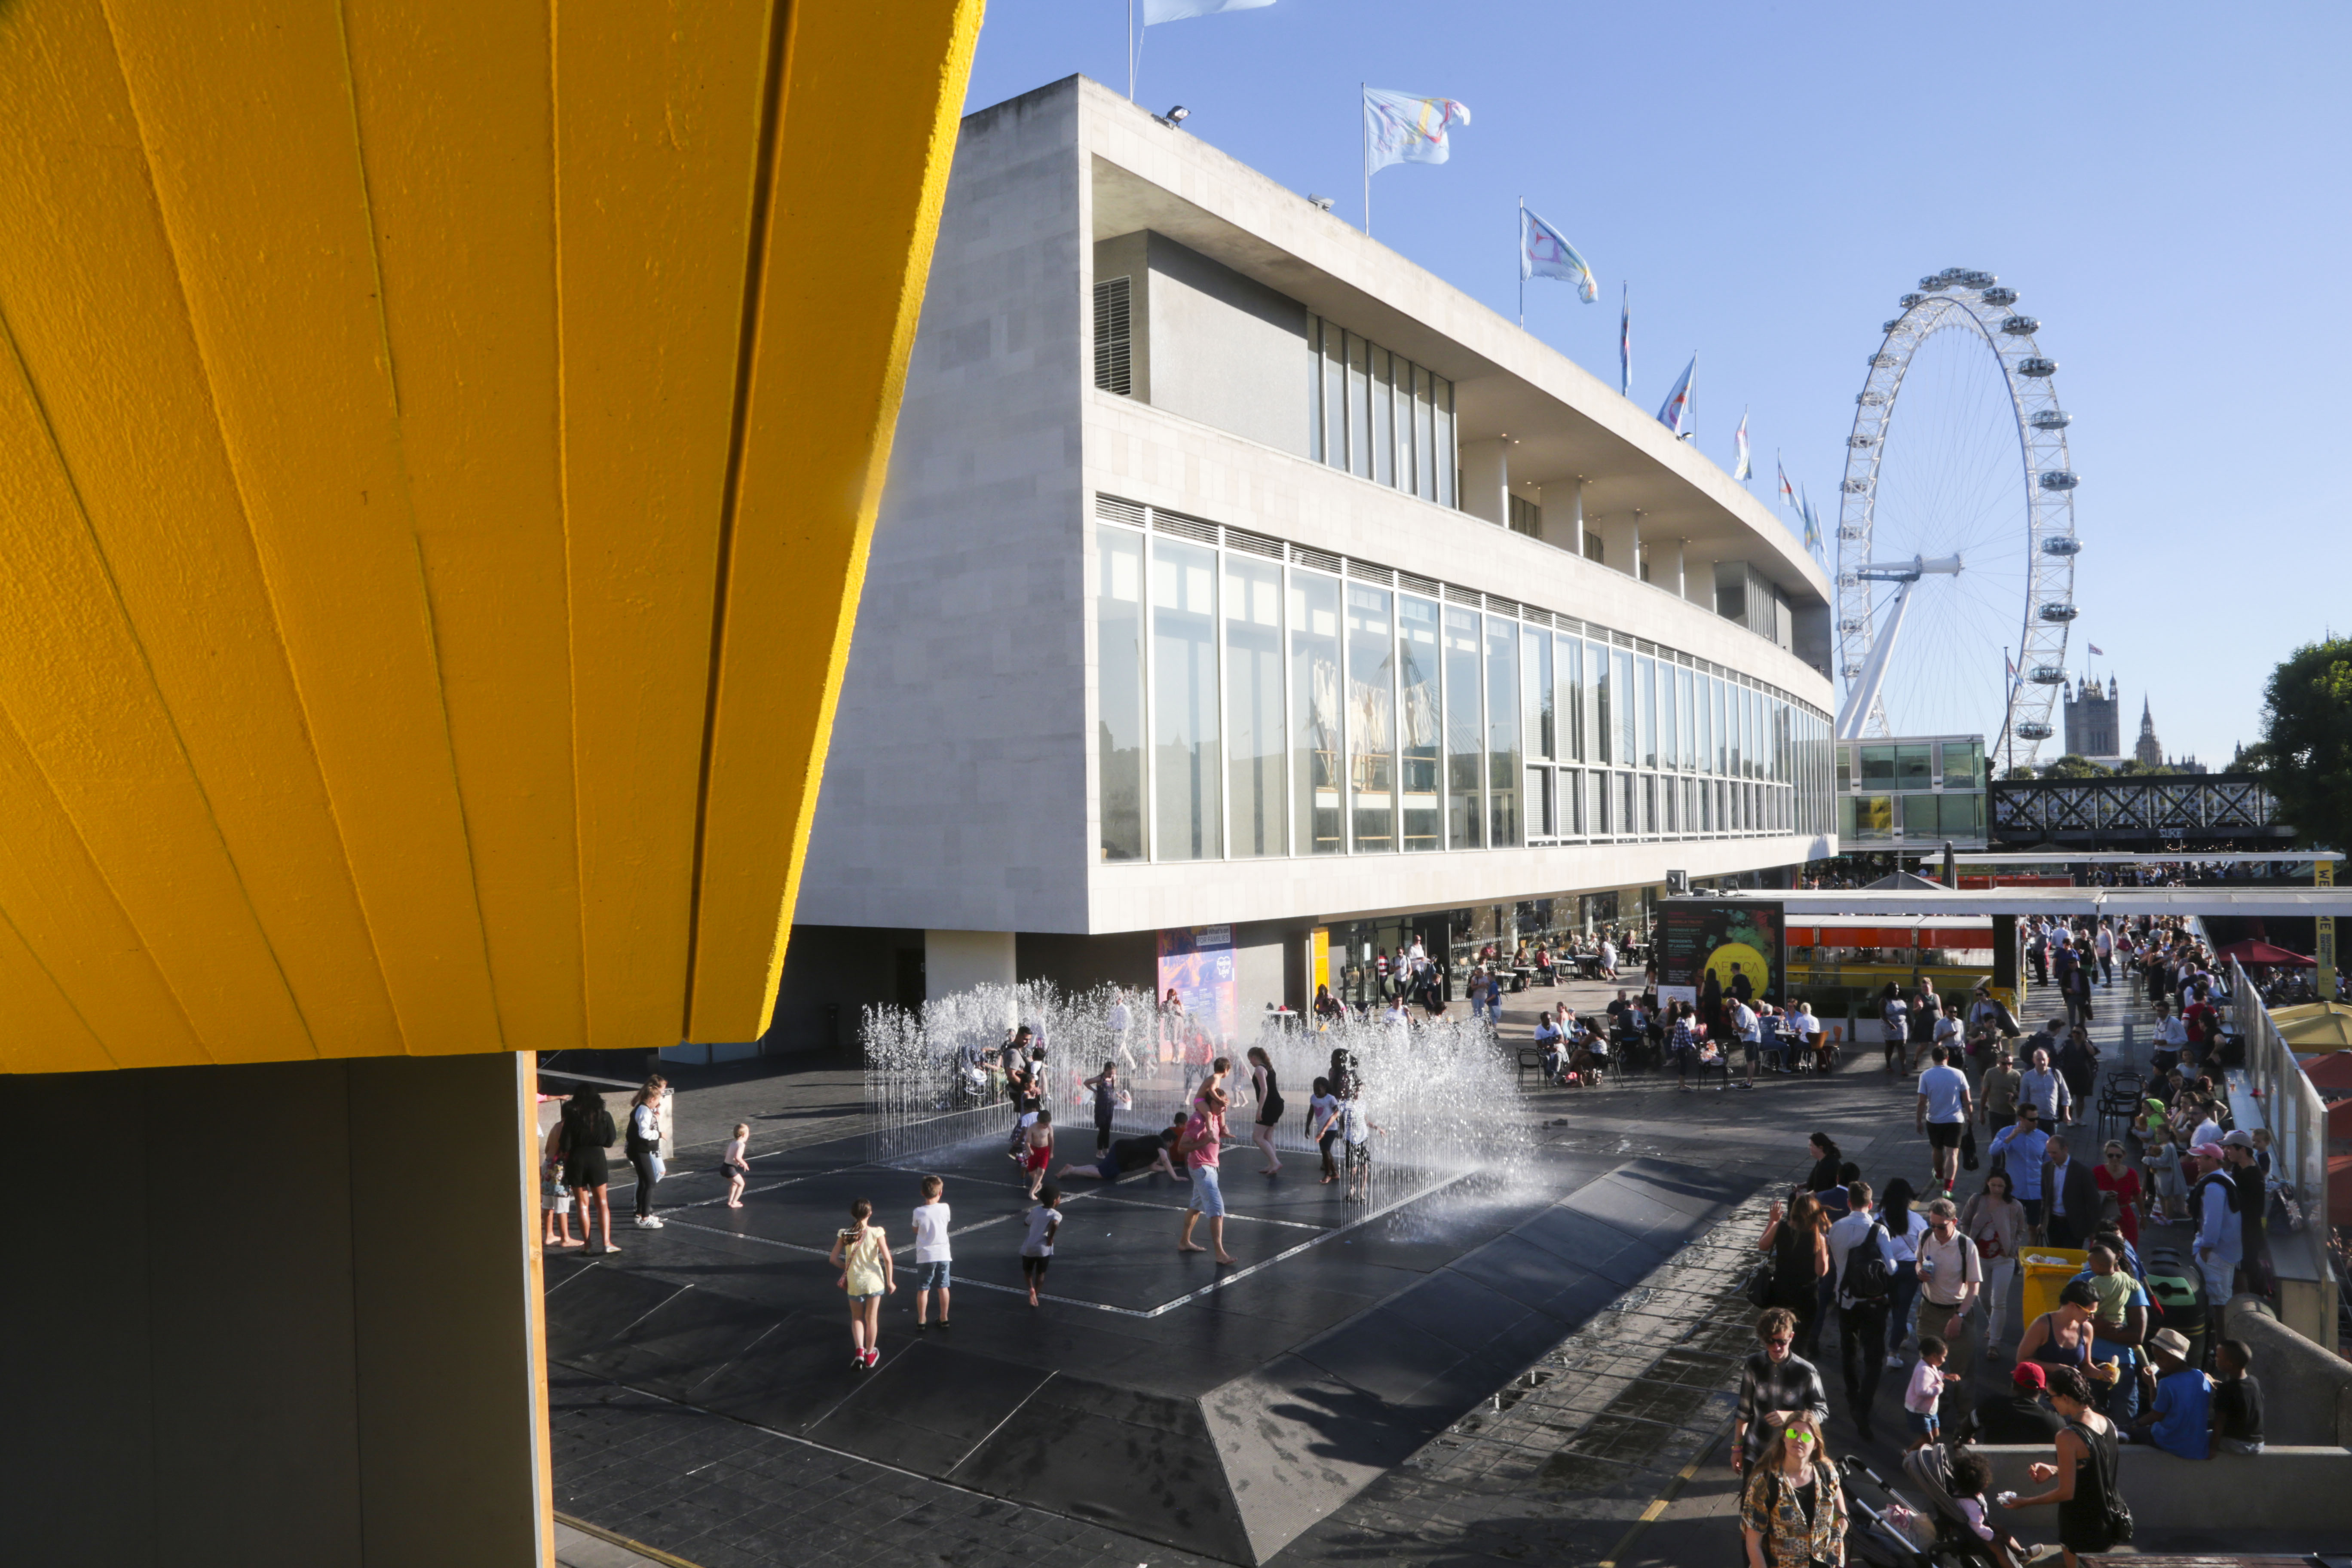 South Bank Visitor Information and Booking Centre - eat South Bank